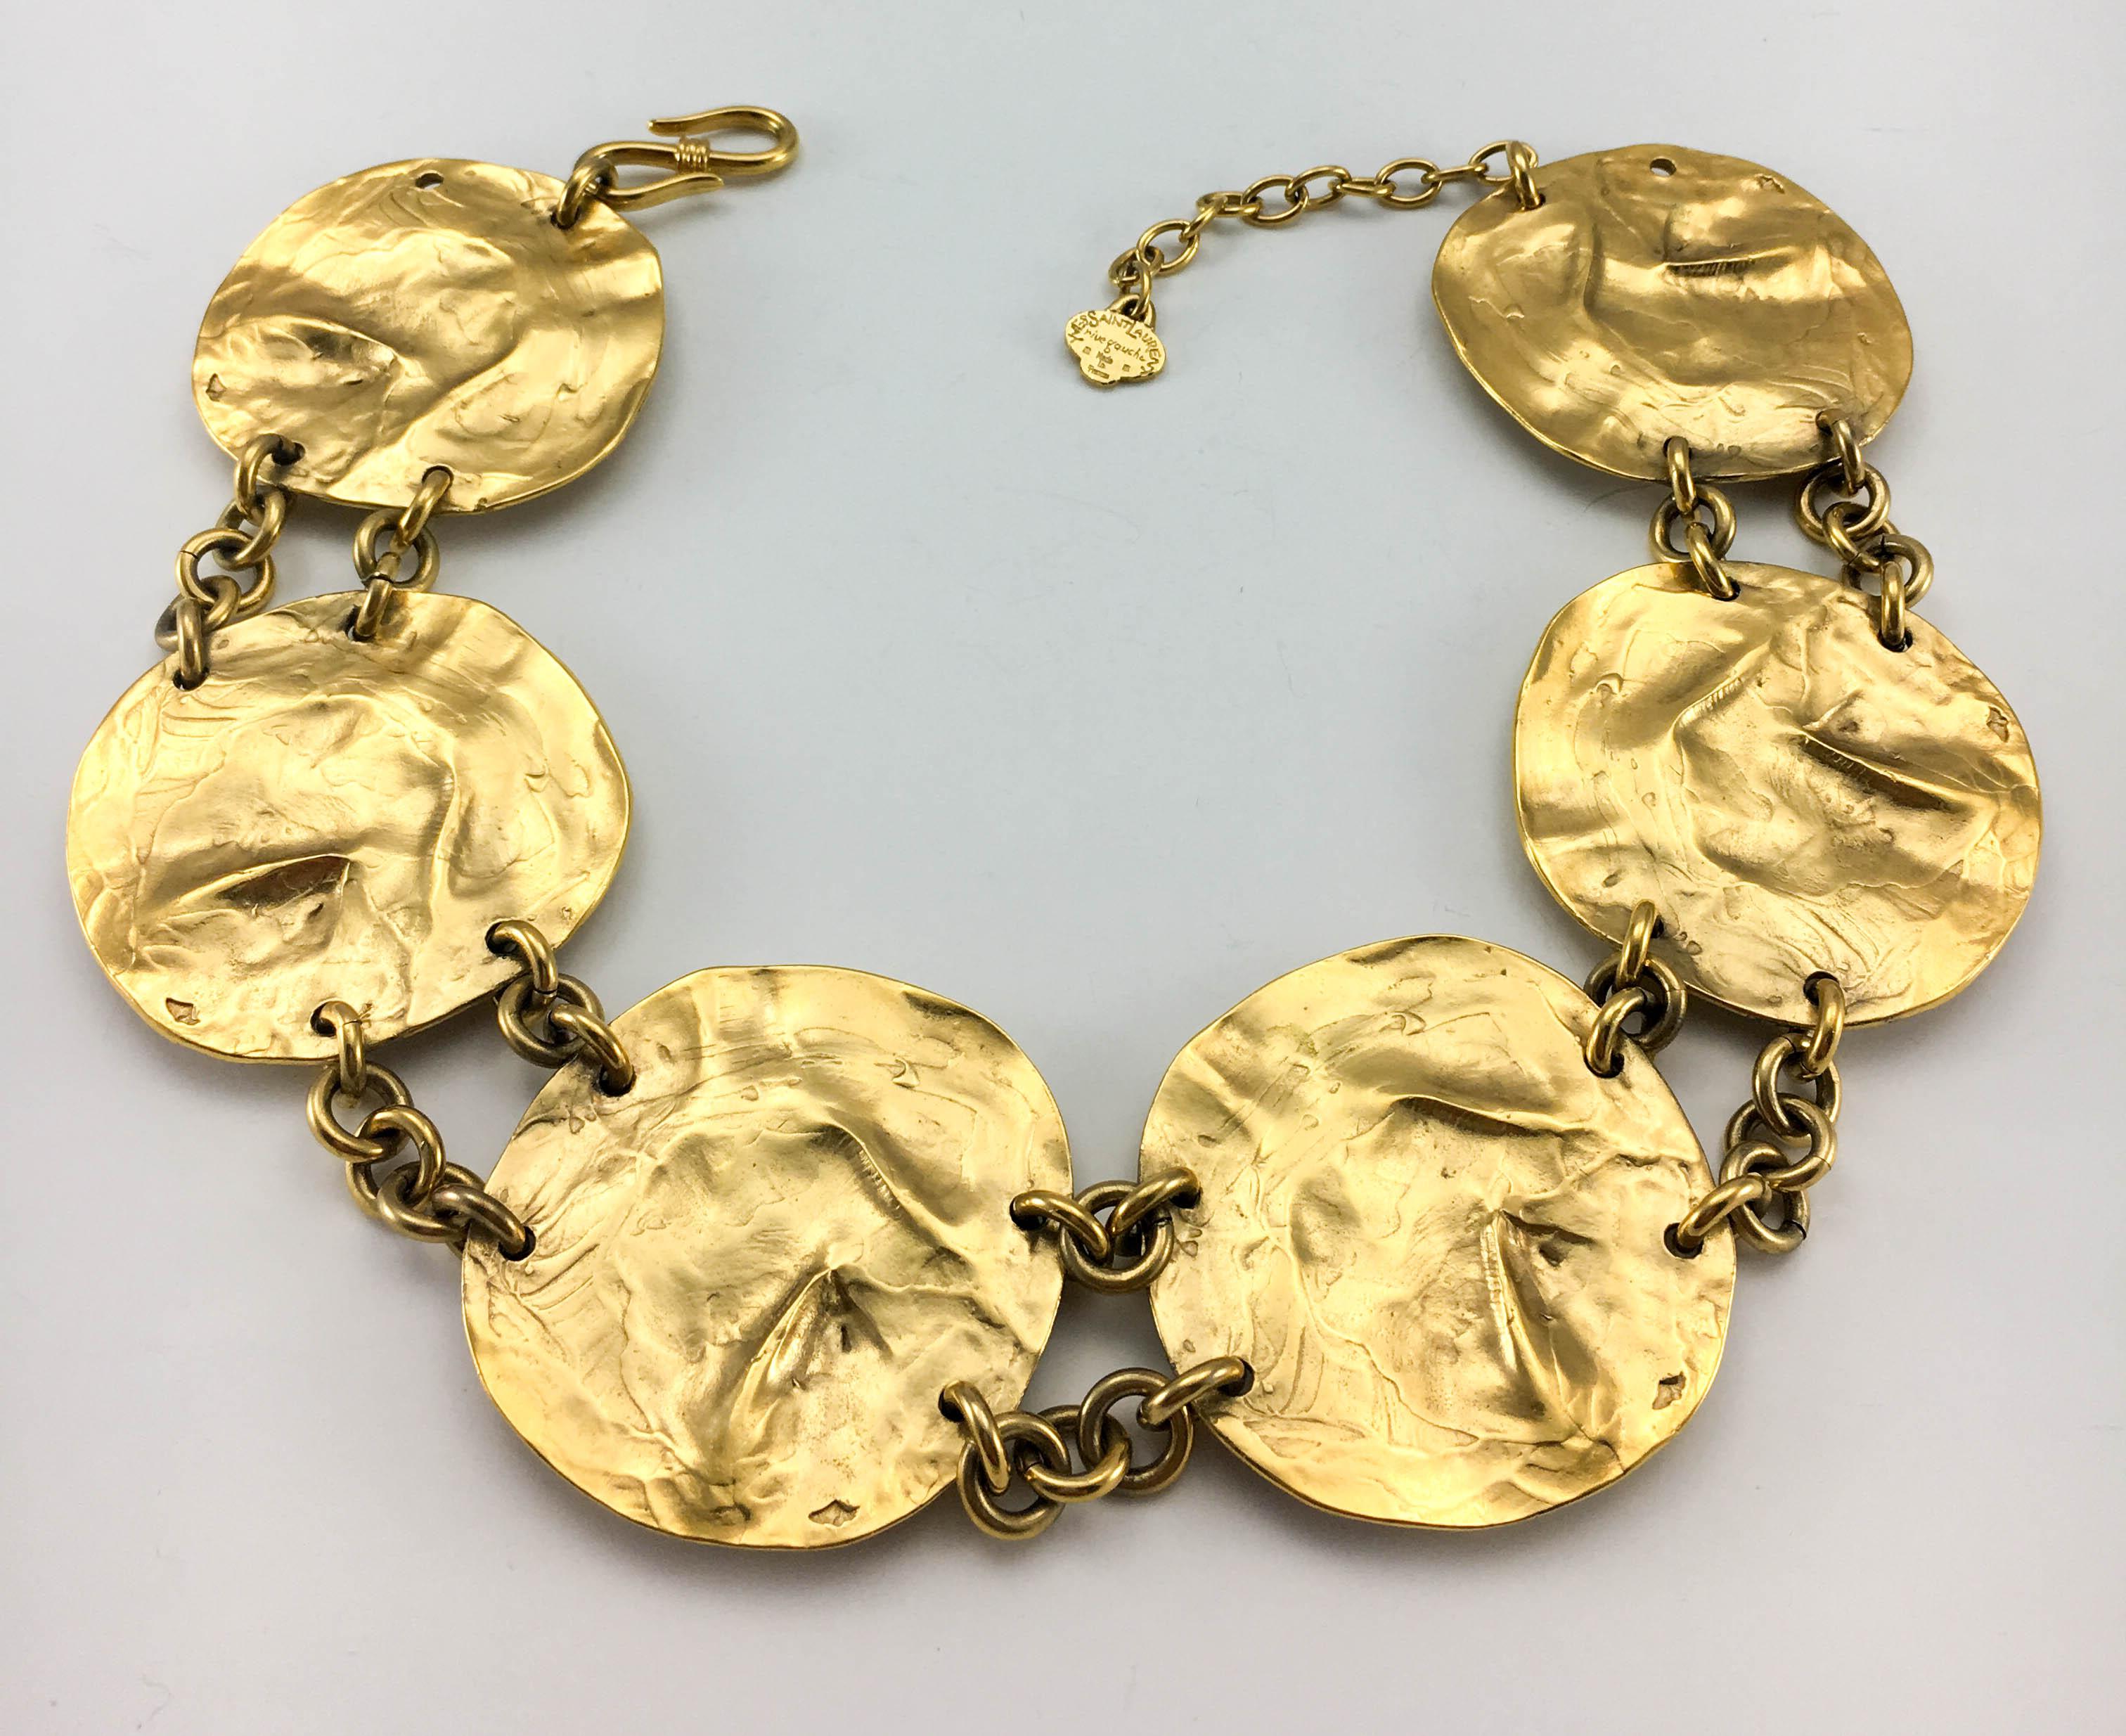 Yves Saint Laurent by Robert Goossens Gold-Plated Disk Necklace, 1989   3